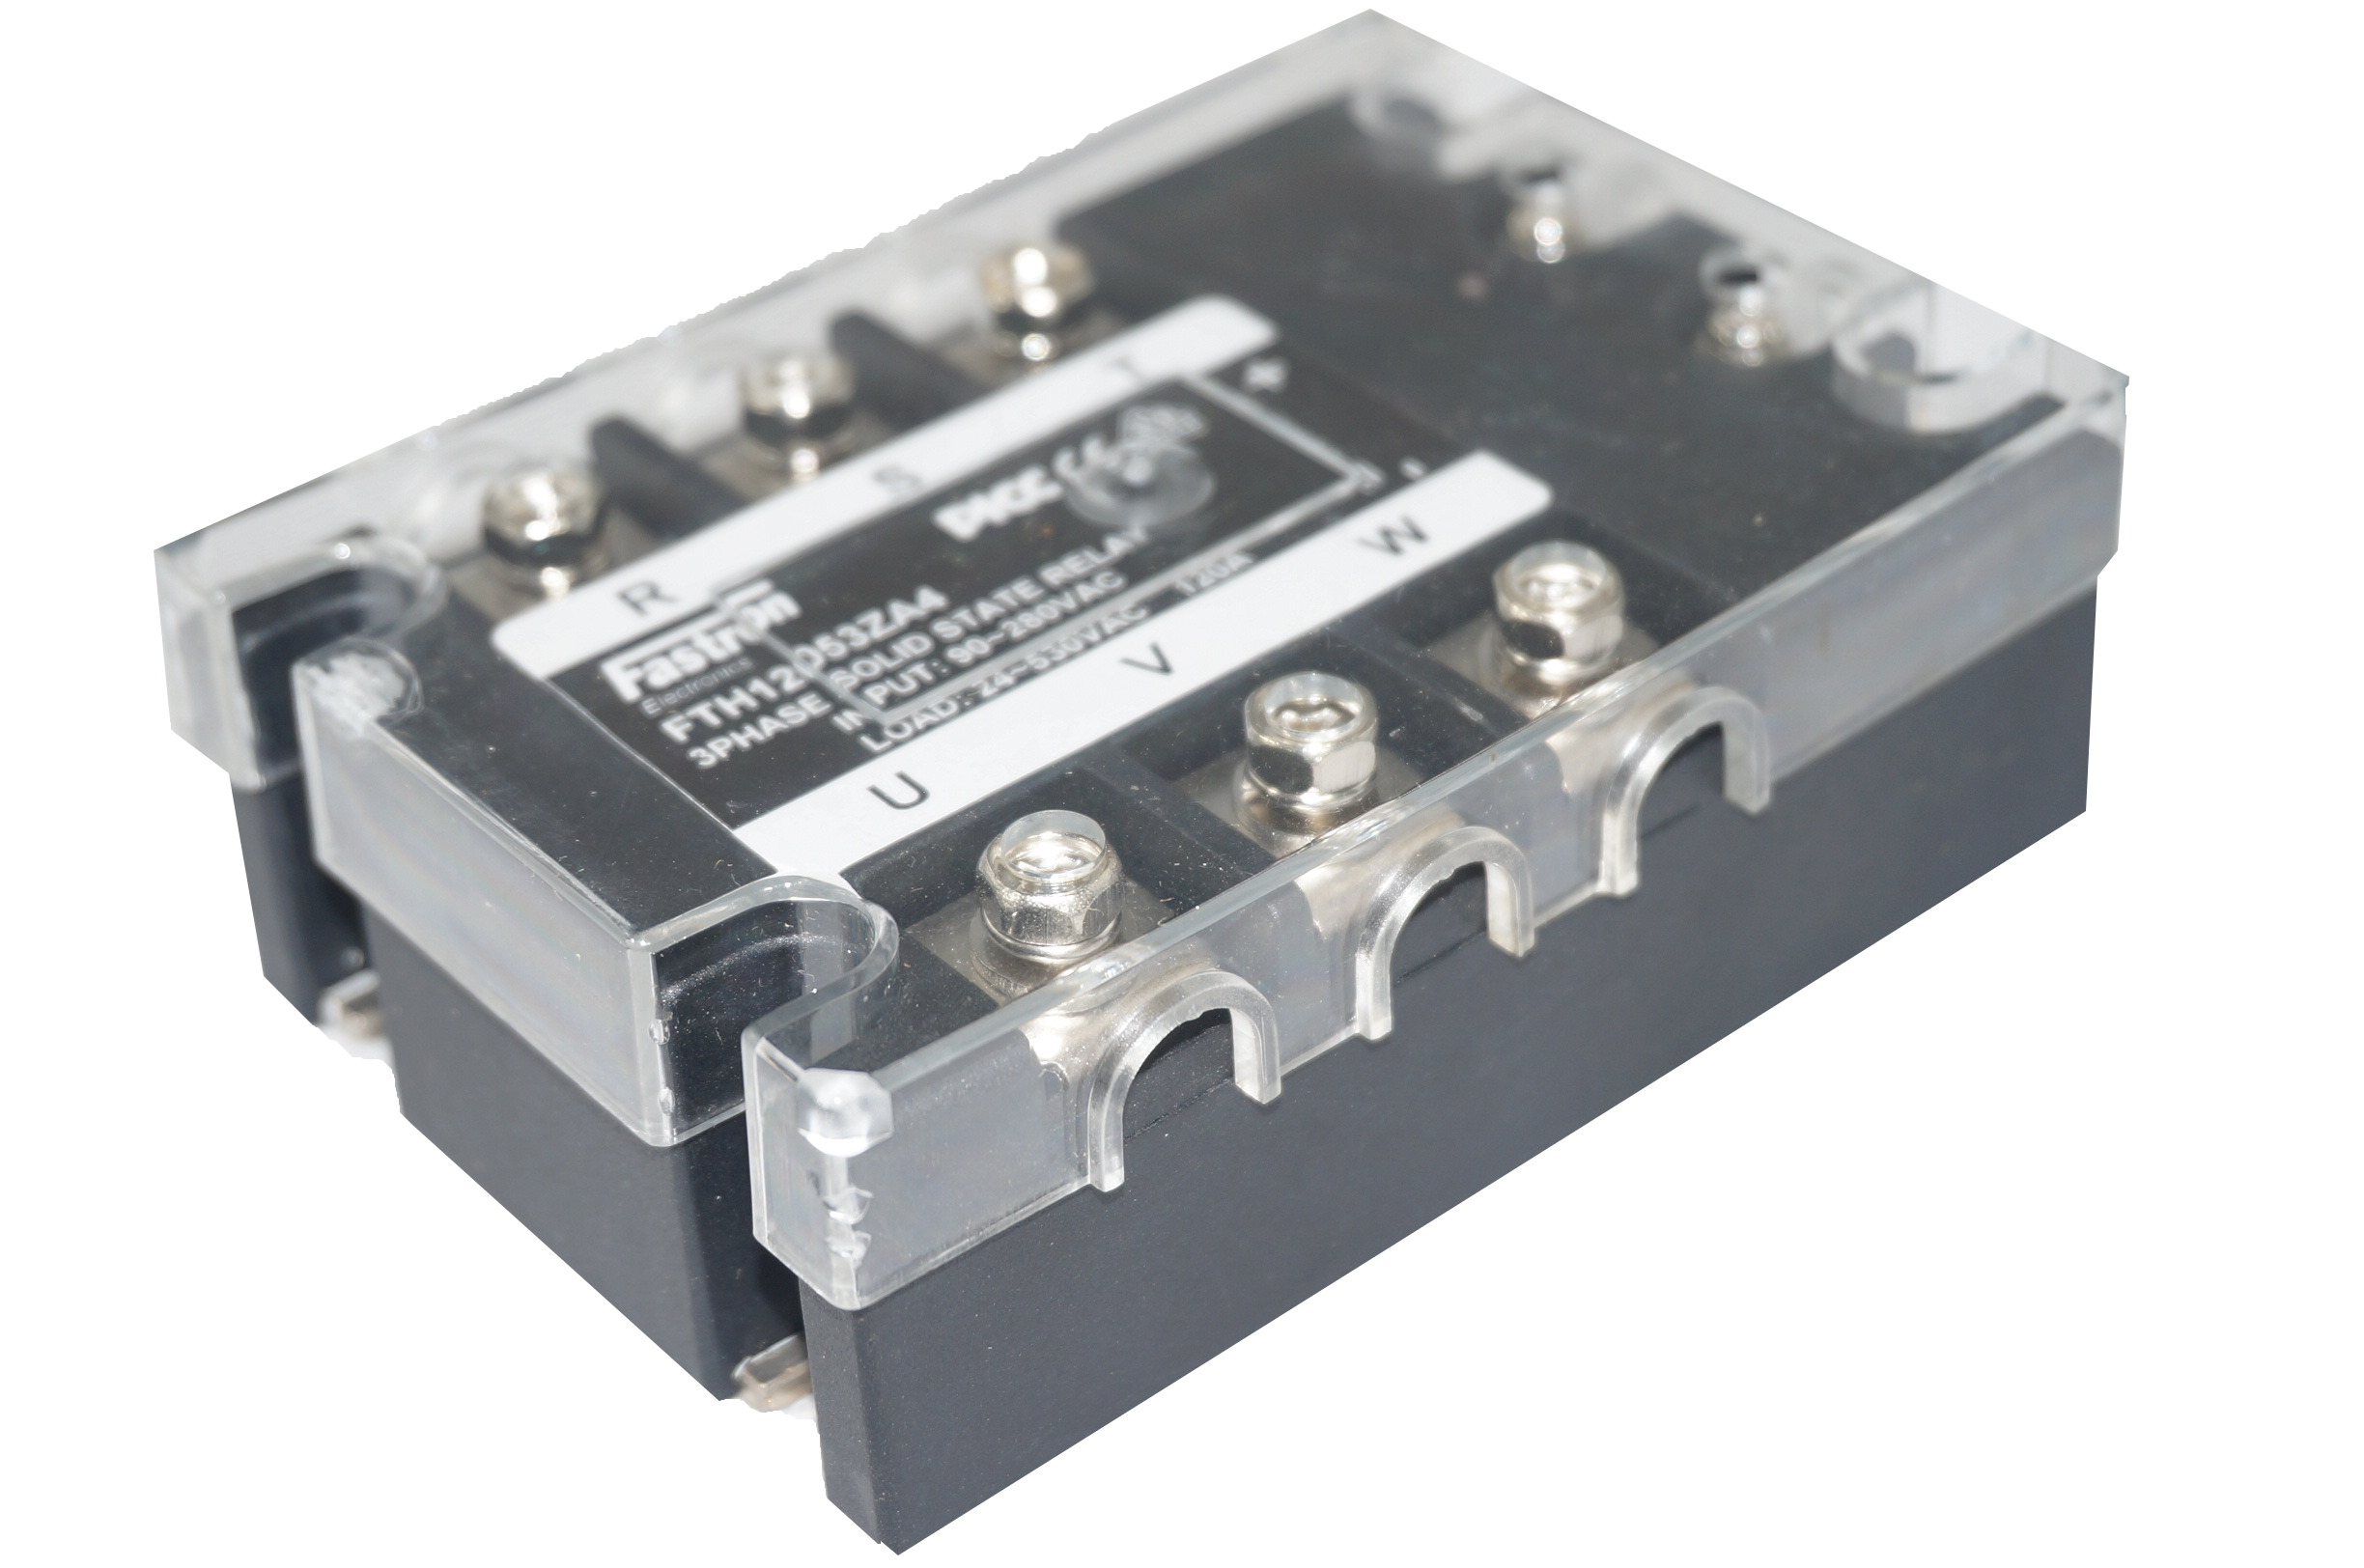 FTH6053ZA4, Solid State Relay, 3 Phase 90-280VAC Control, 60A, 70-530VAC Load, with IP20 Cover